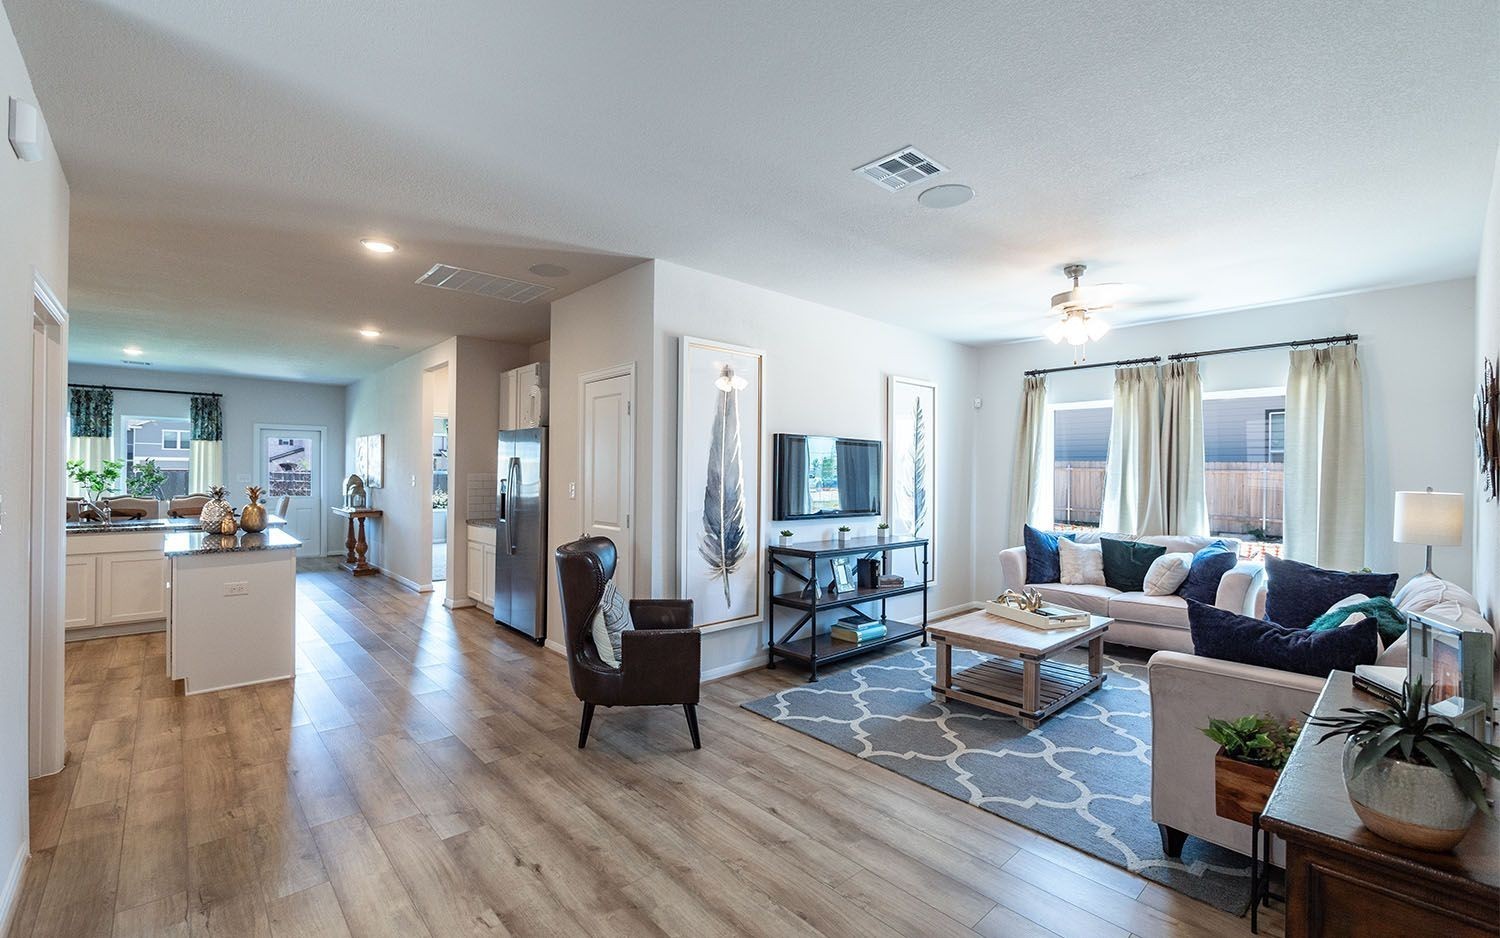 4. Sonterra By Castlerock Communities By Appointment Only!